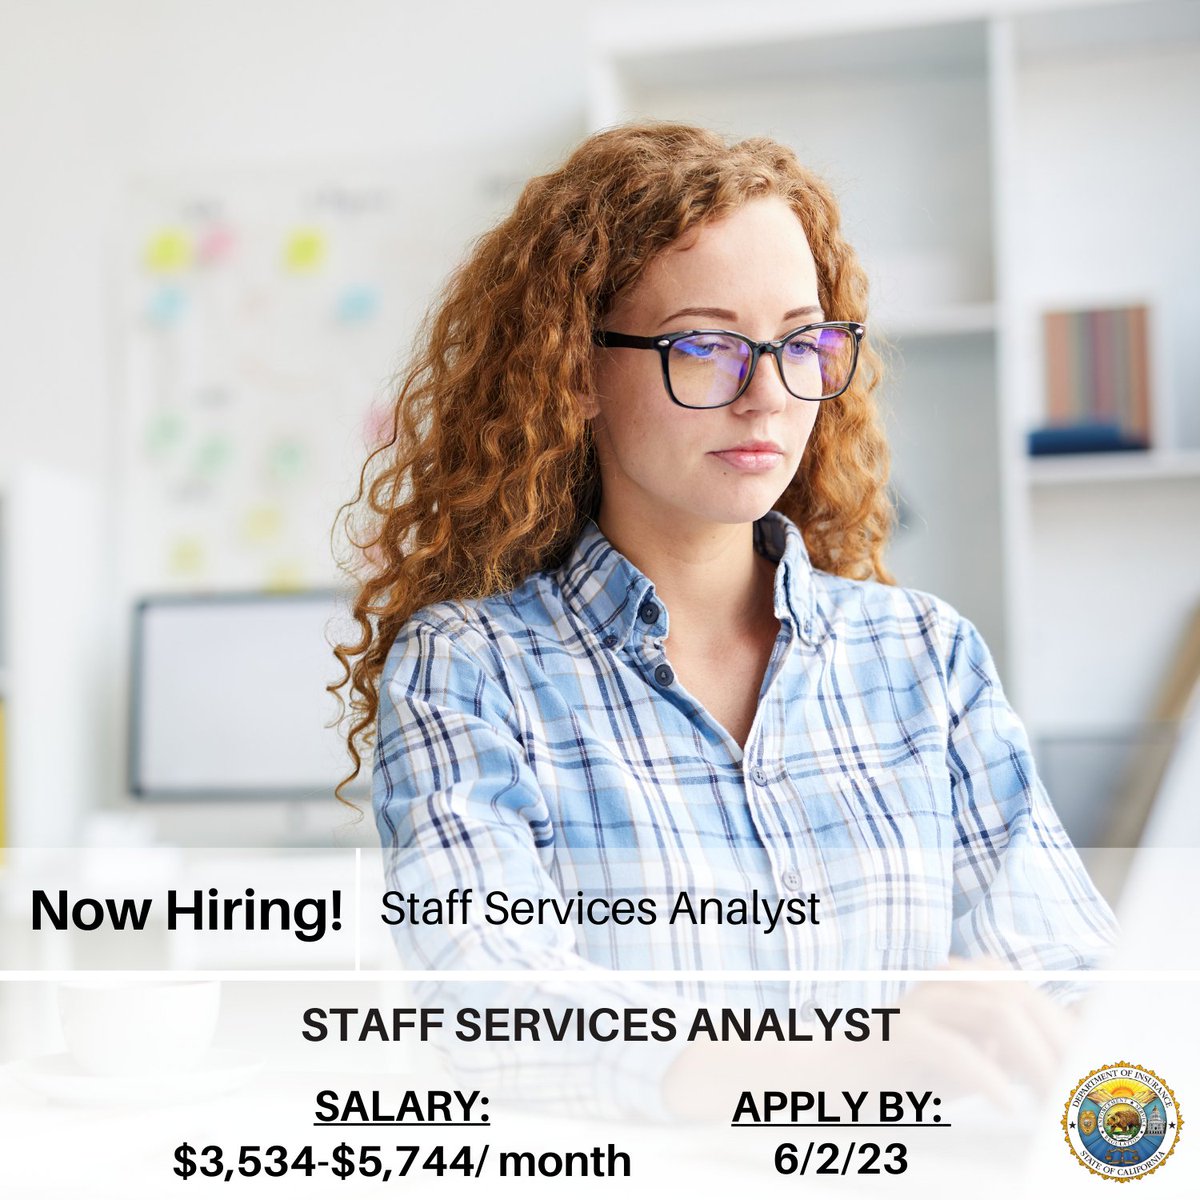 CDI is seeking a Staff Services Analyst (SSA) to join our team!

Click to apply: calcareers.ca.gov/CalHrPublic/Jo…

#work4ca #statejobs